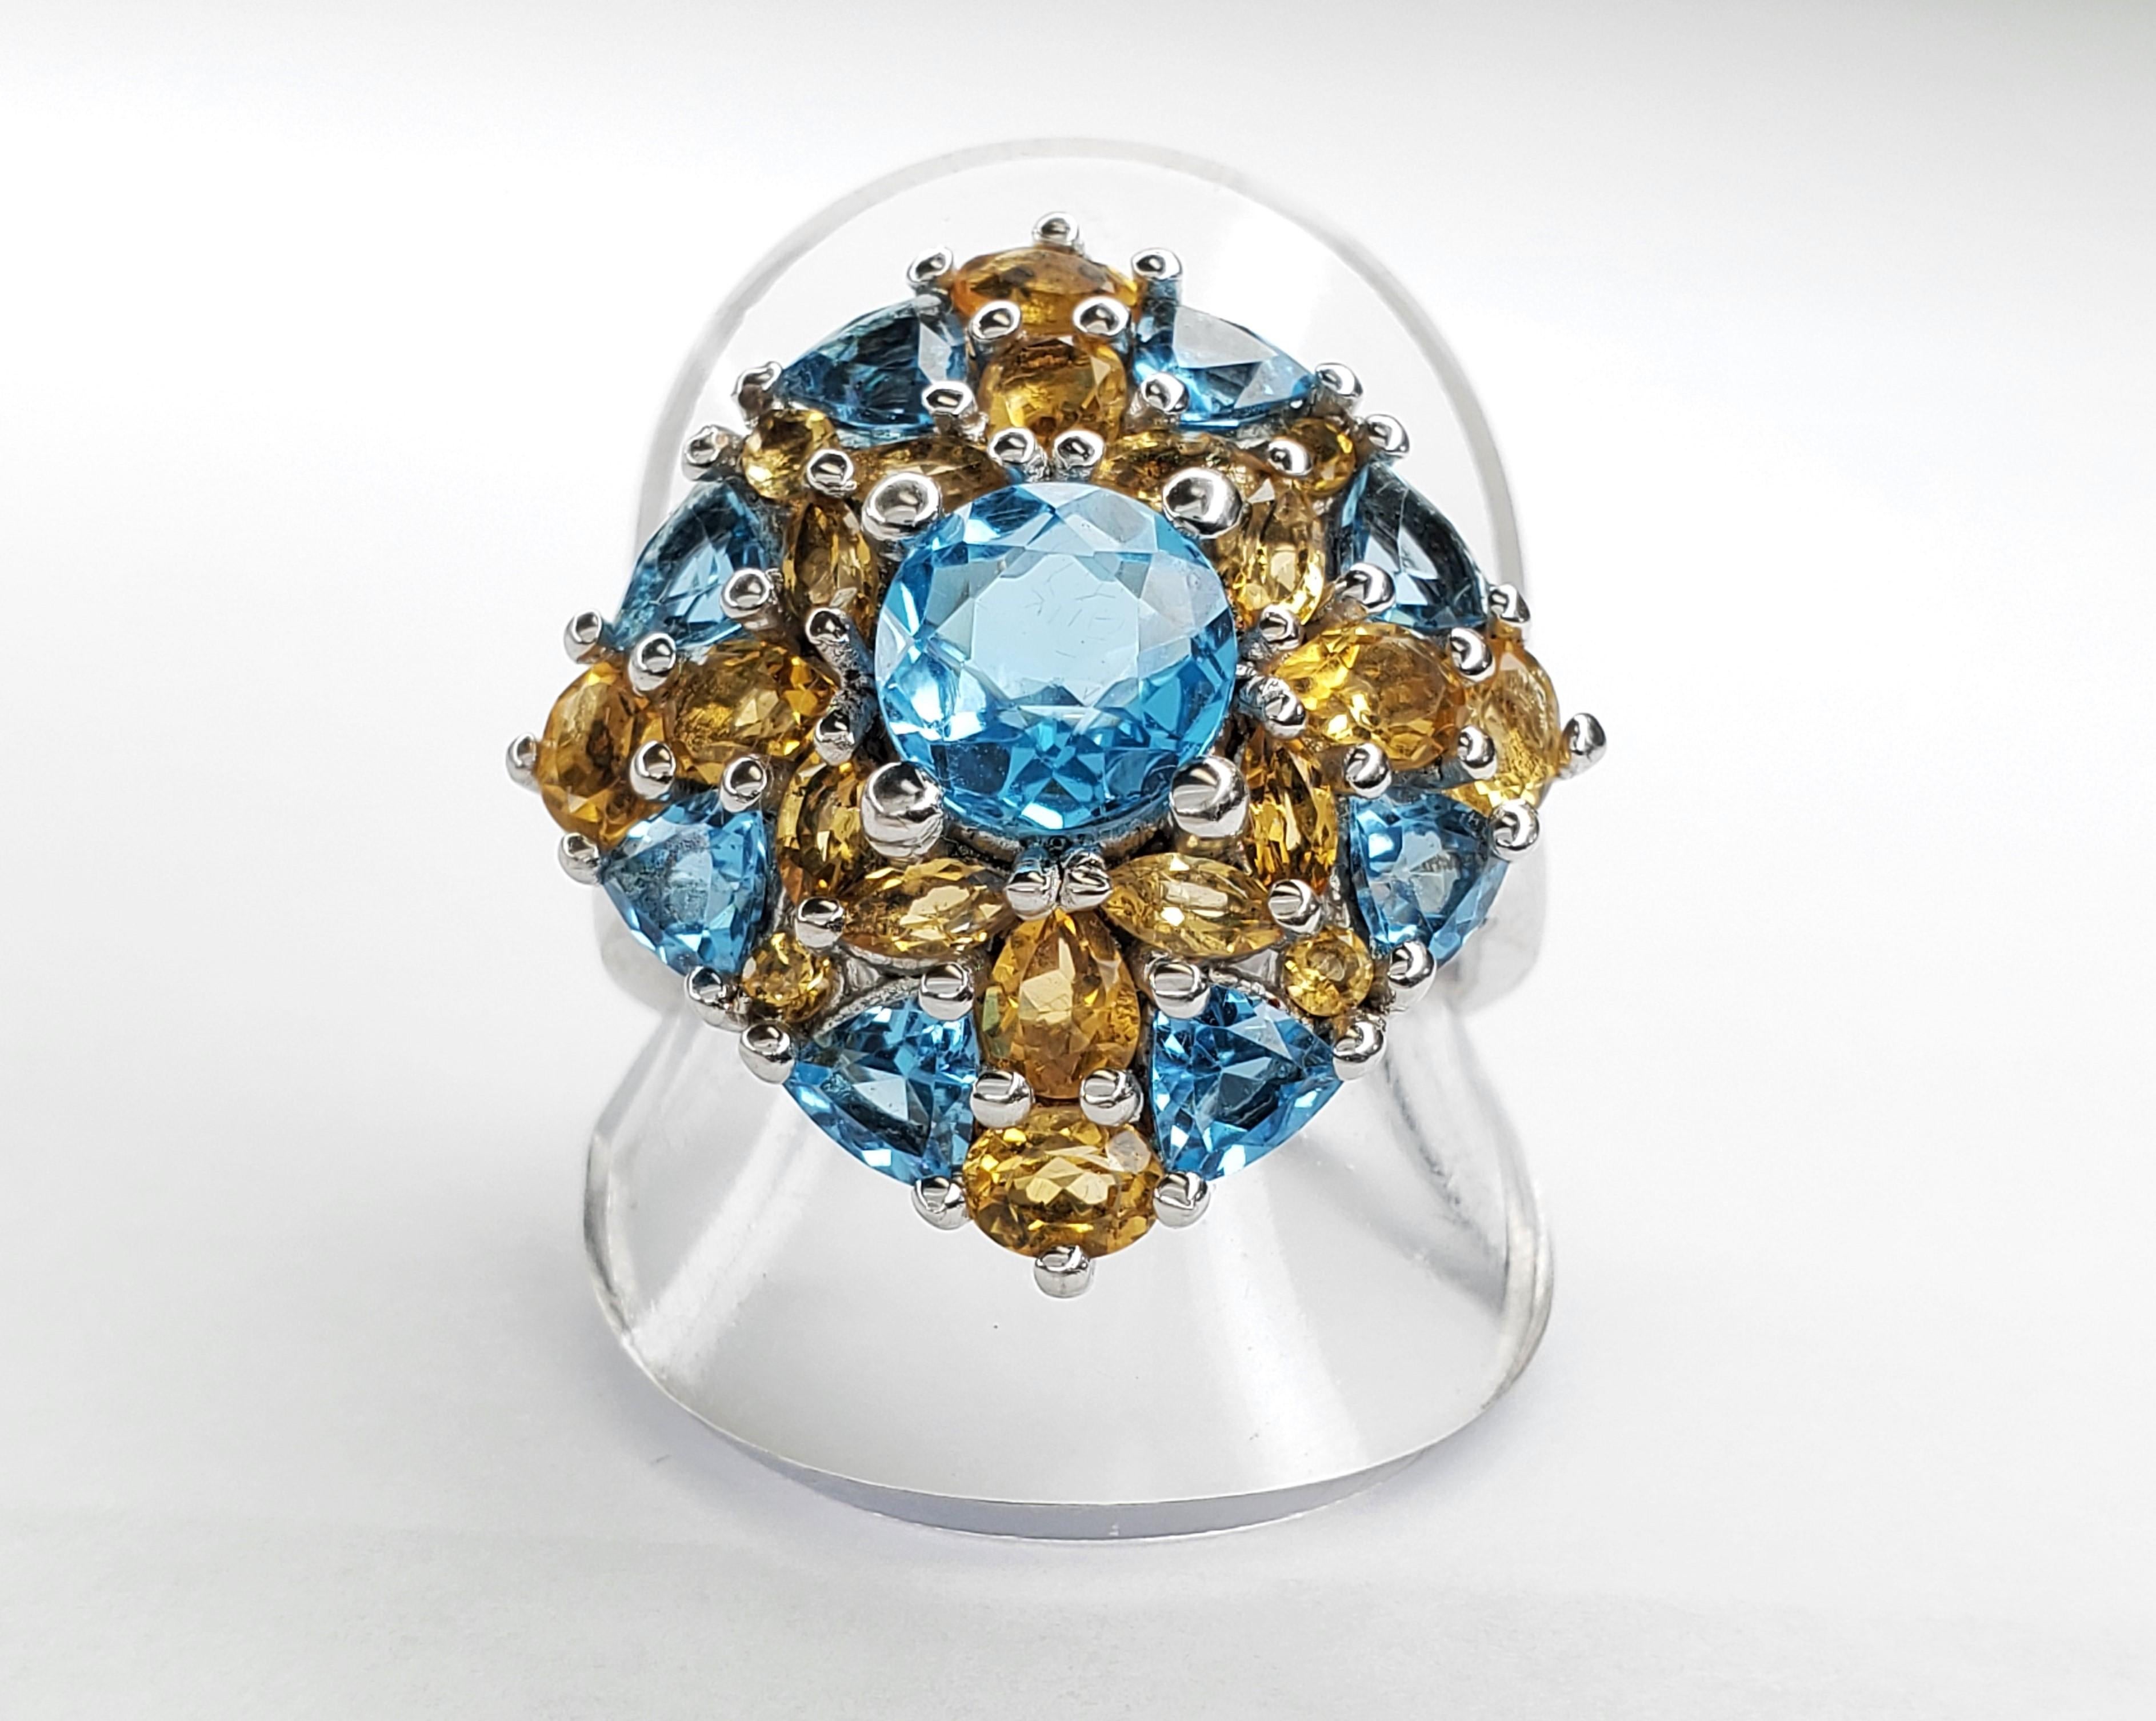 Round Cut 5.48cttw Swiss Blue Topaz and Citrine Sterling Silver Ring